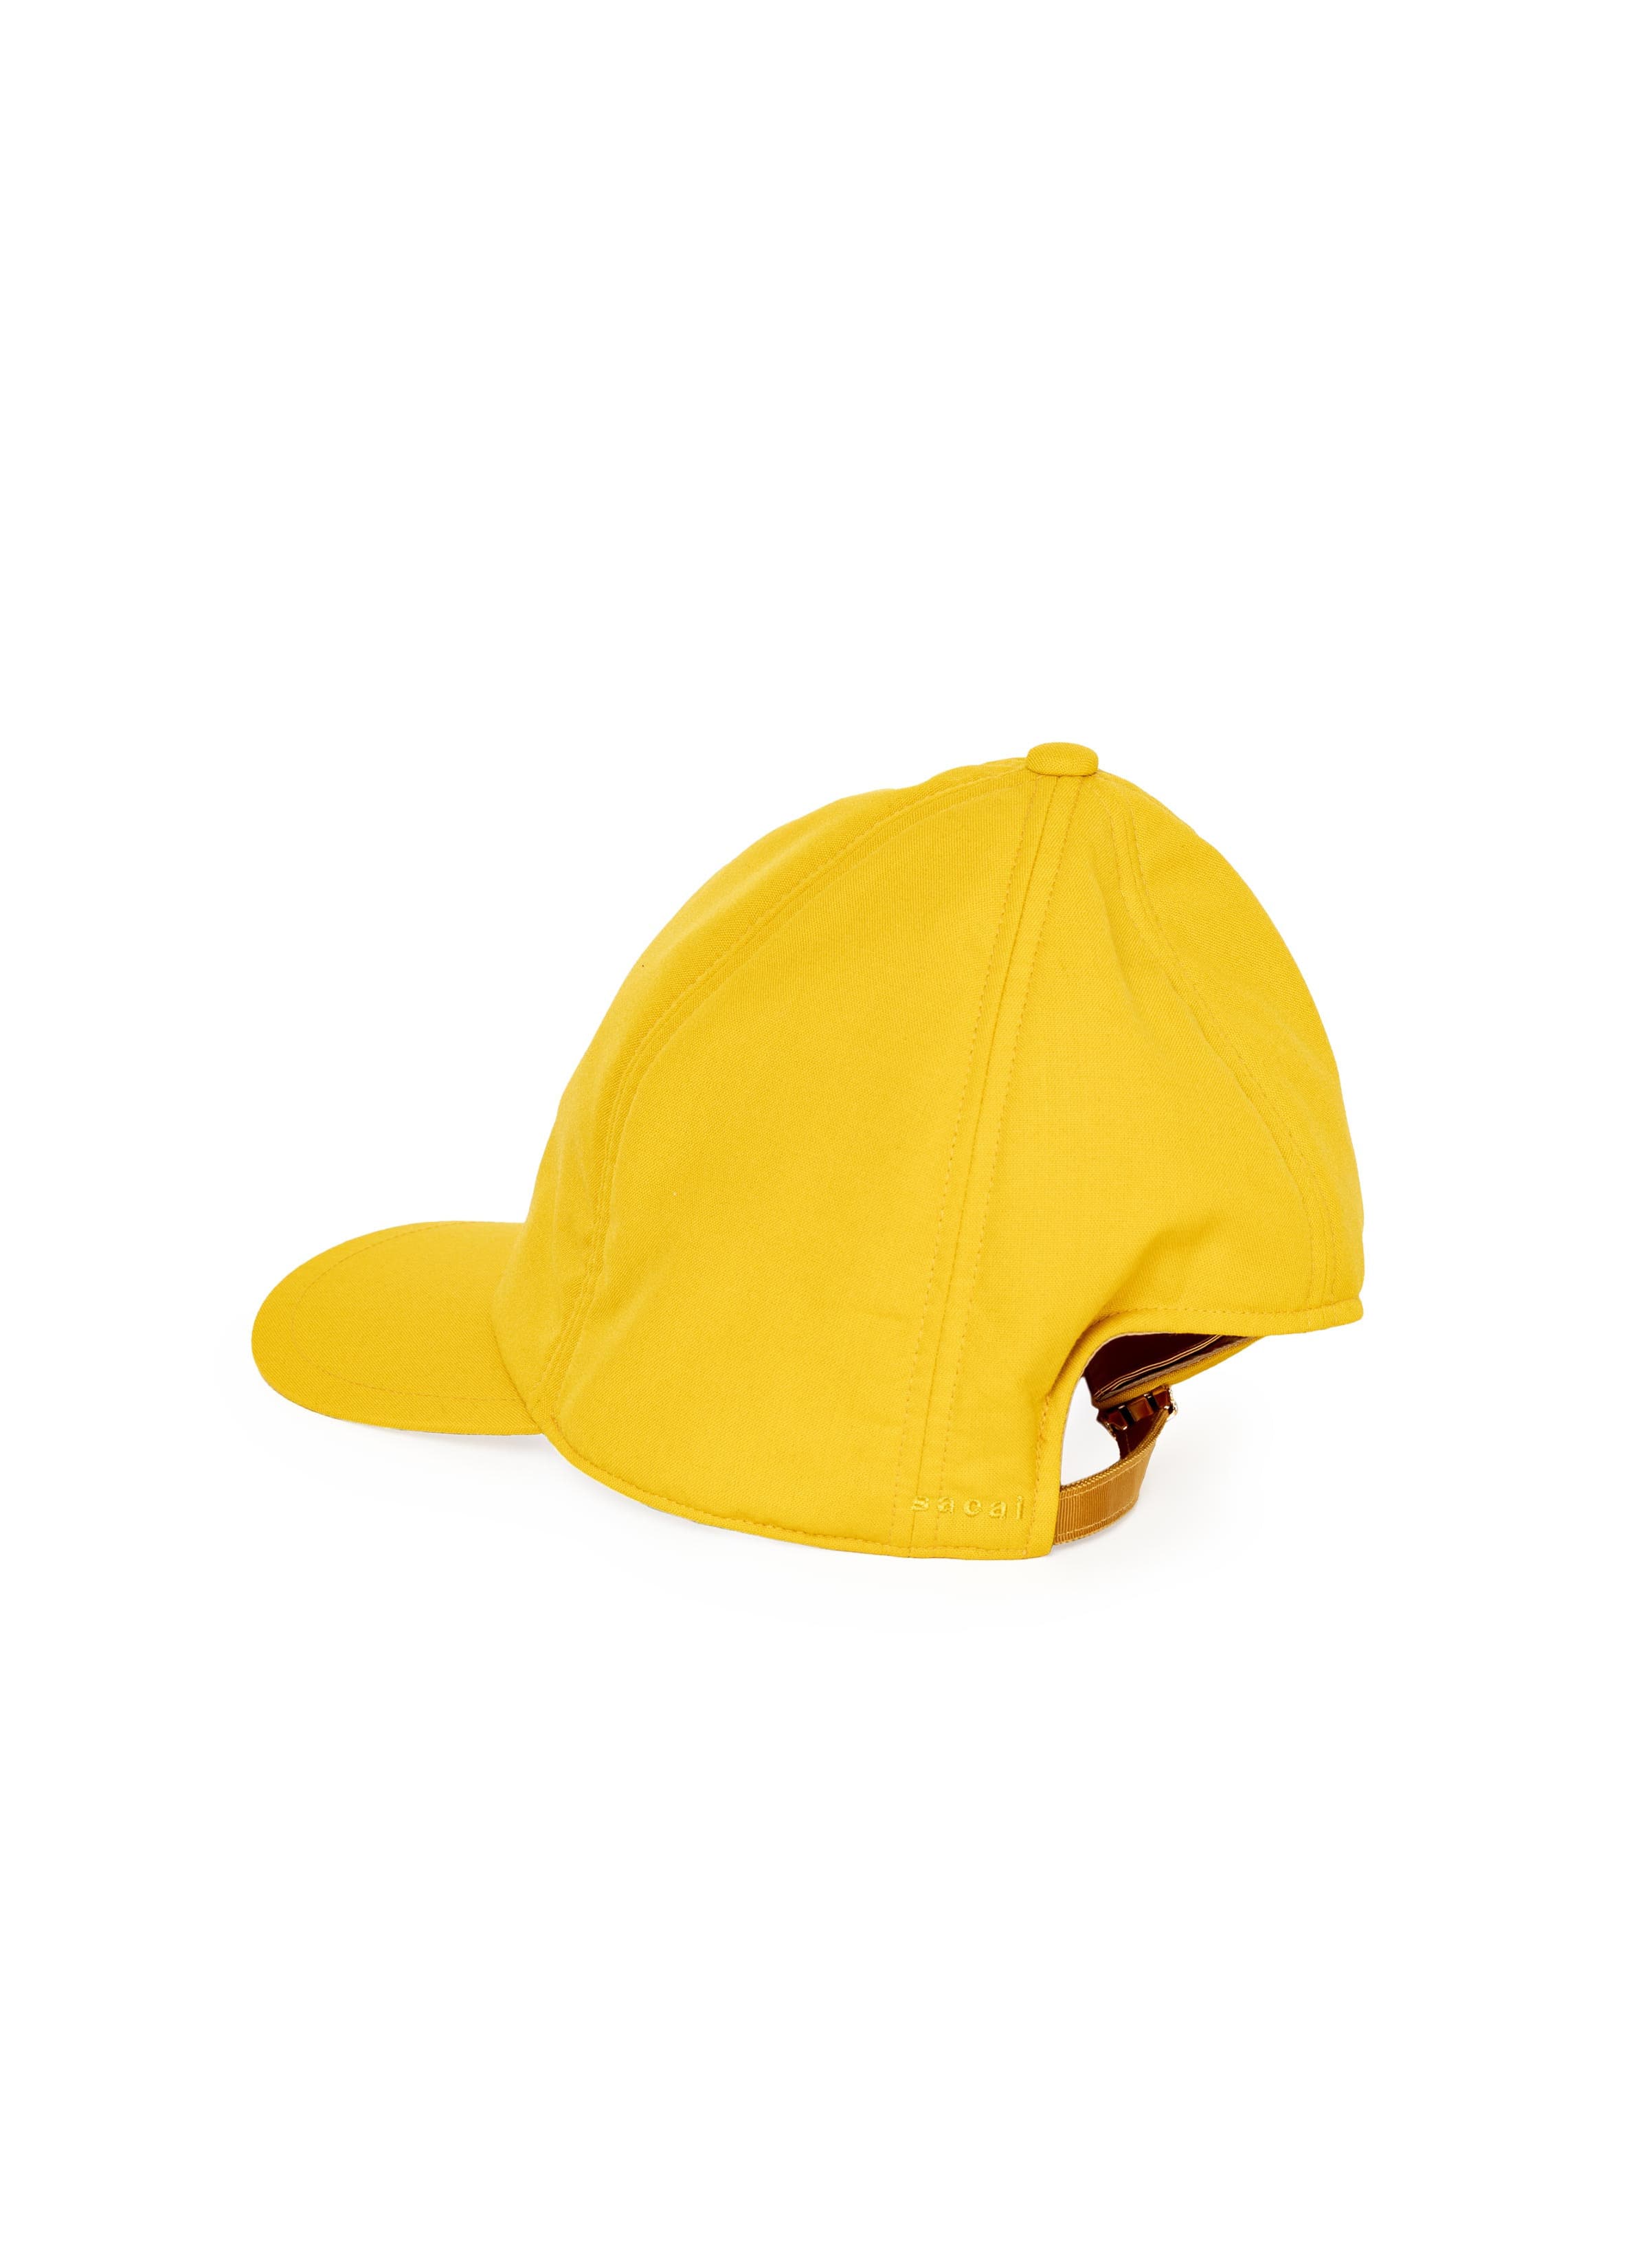 Suiting Mountain S Cap 詳細画像 YELLOW 2